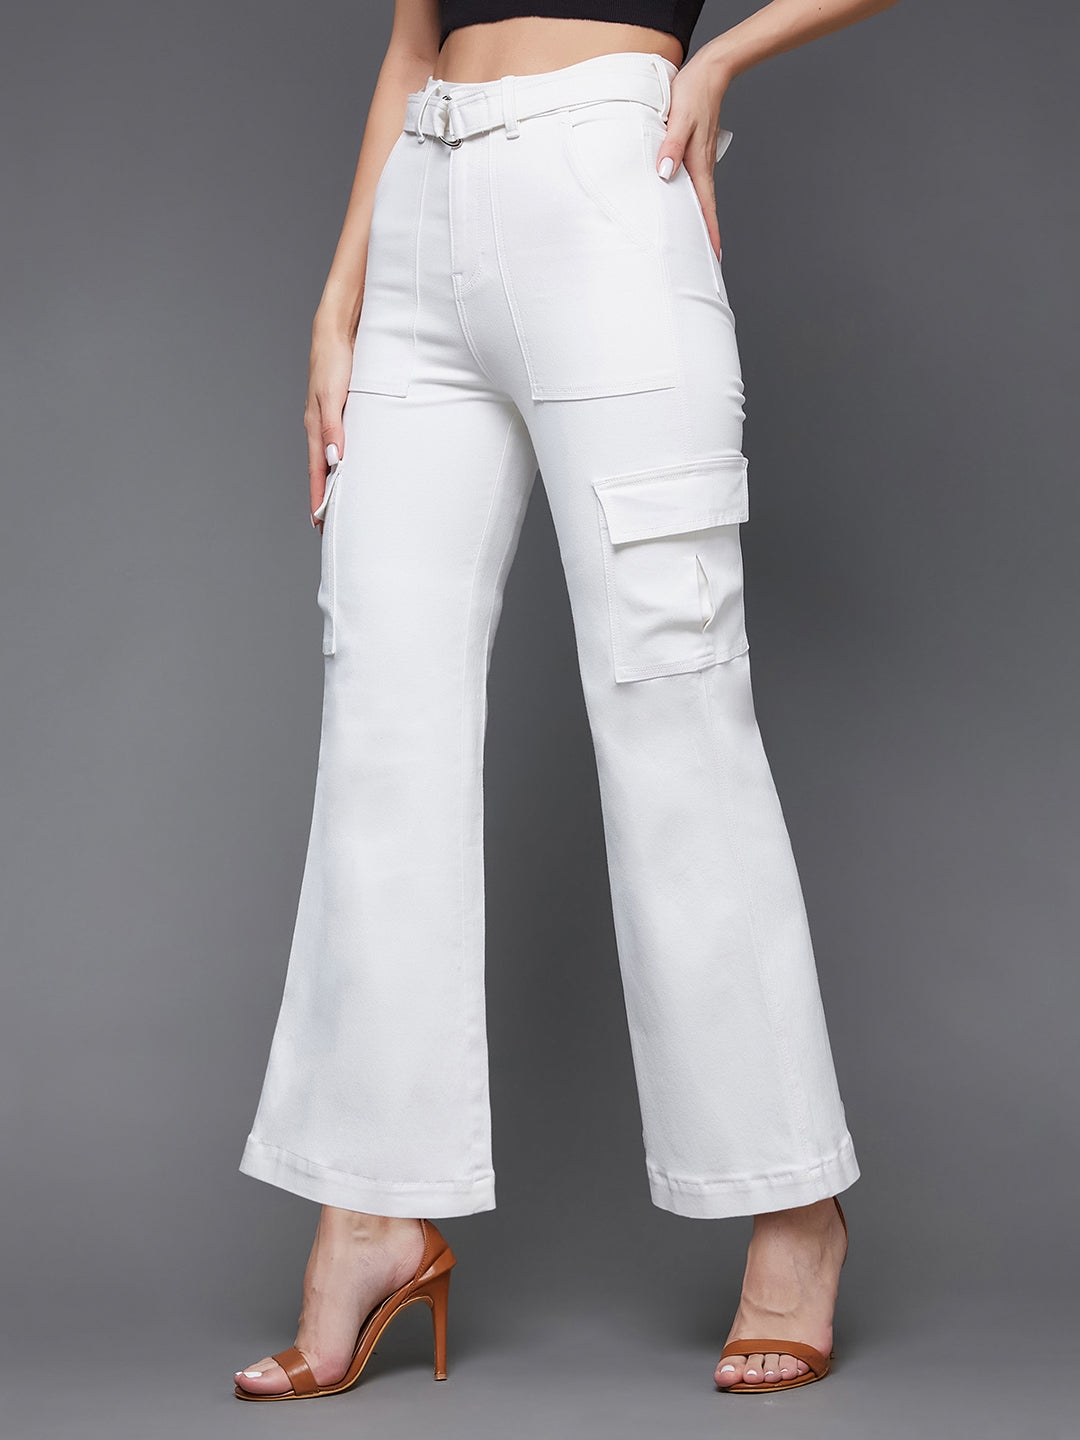 MISS CHASE | Women's White Solid Flared Jeans